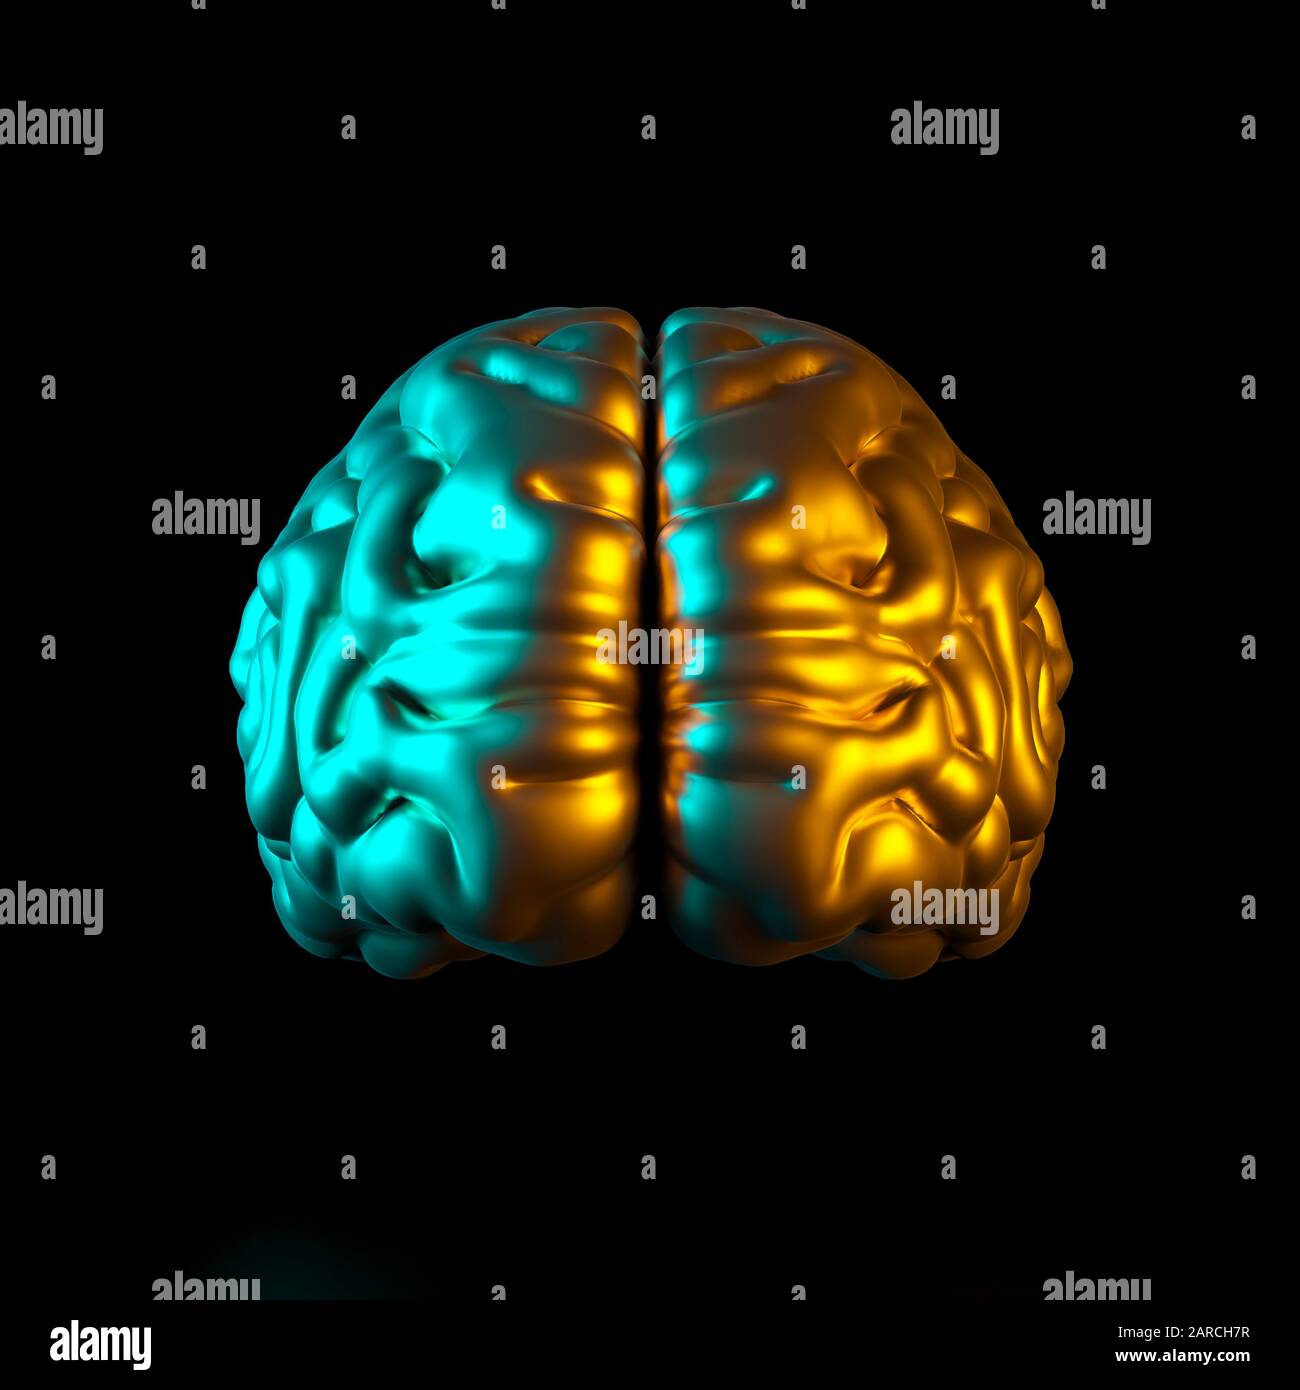 3d render image of a gold colored human brain on a black background with colored side lights. Square format no one around. Intelligence and psychology Stock Photo